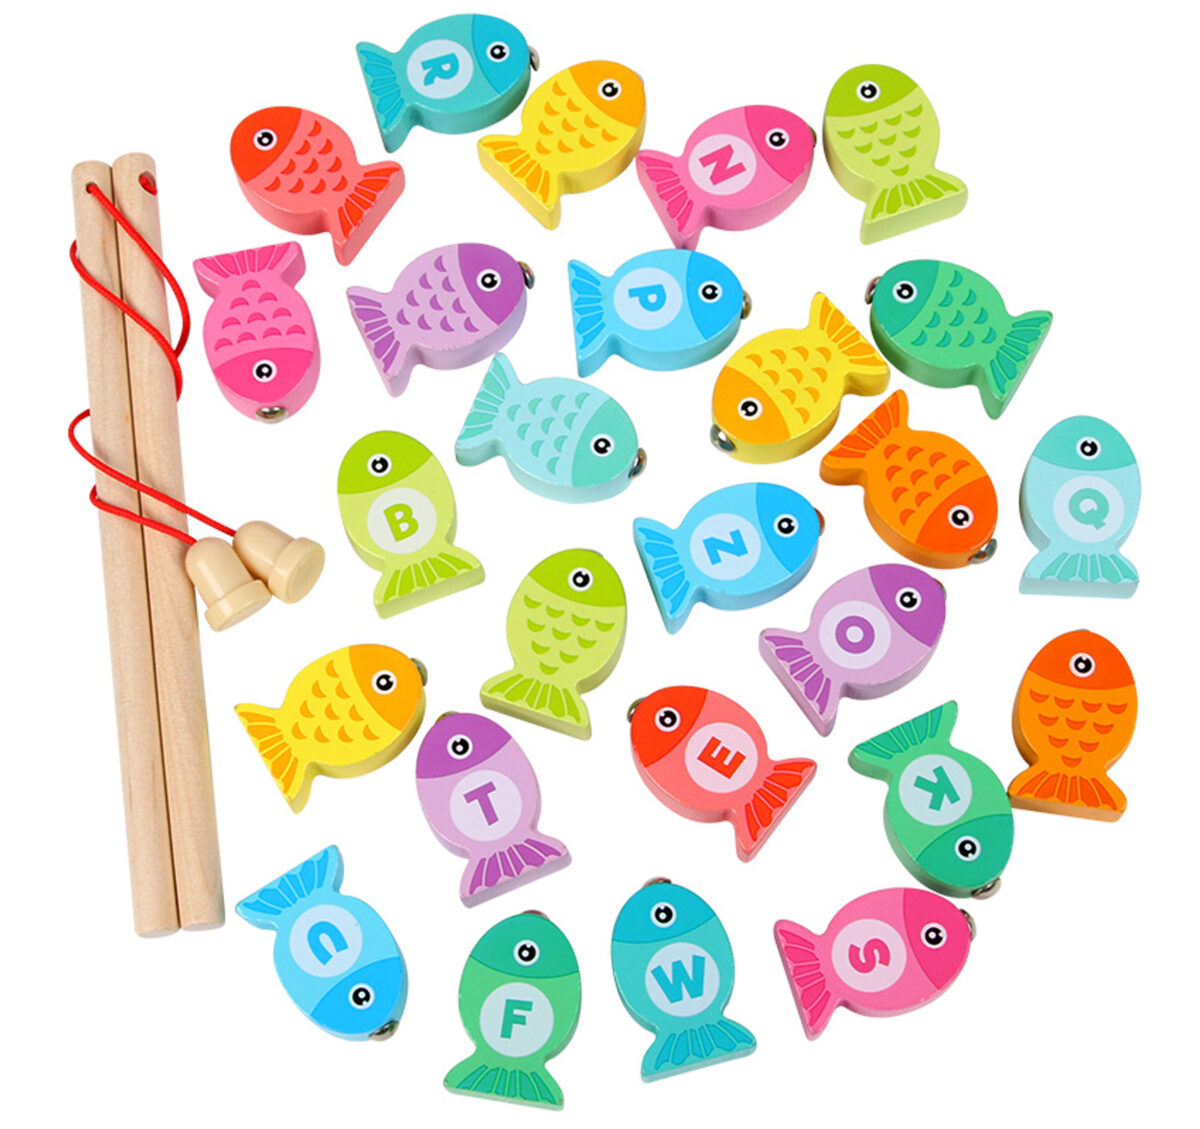 Balala is a simple fishing game to learn the alphabet.